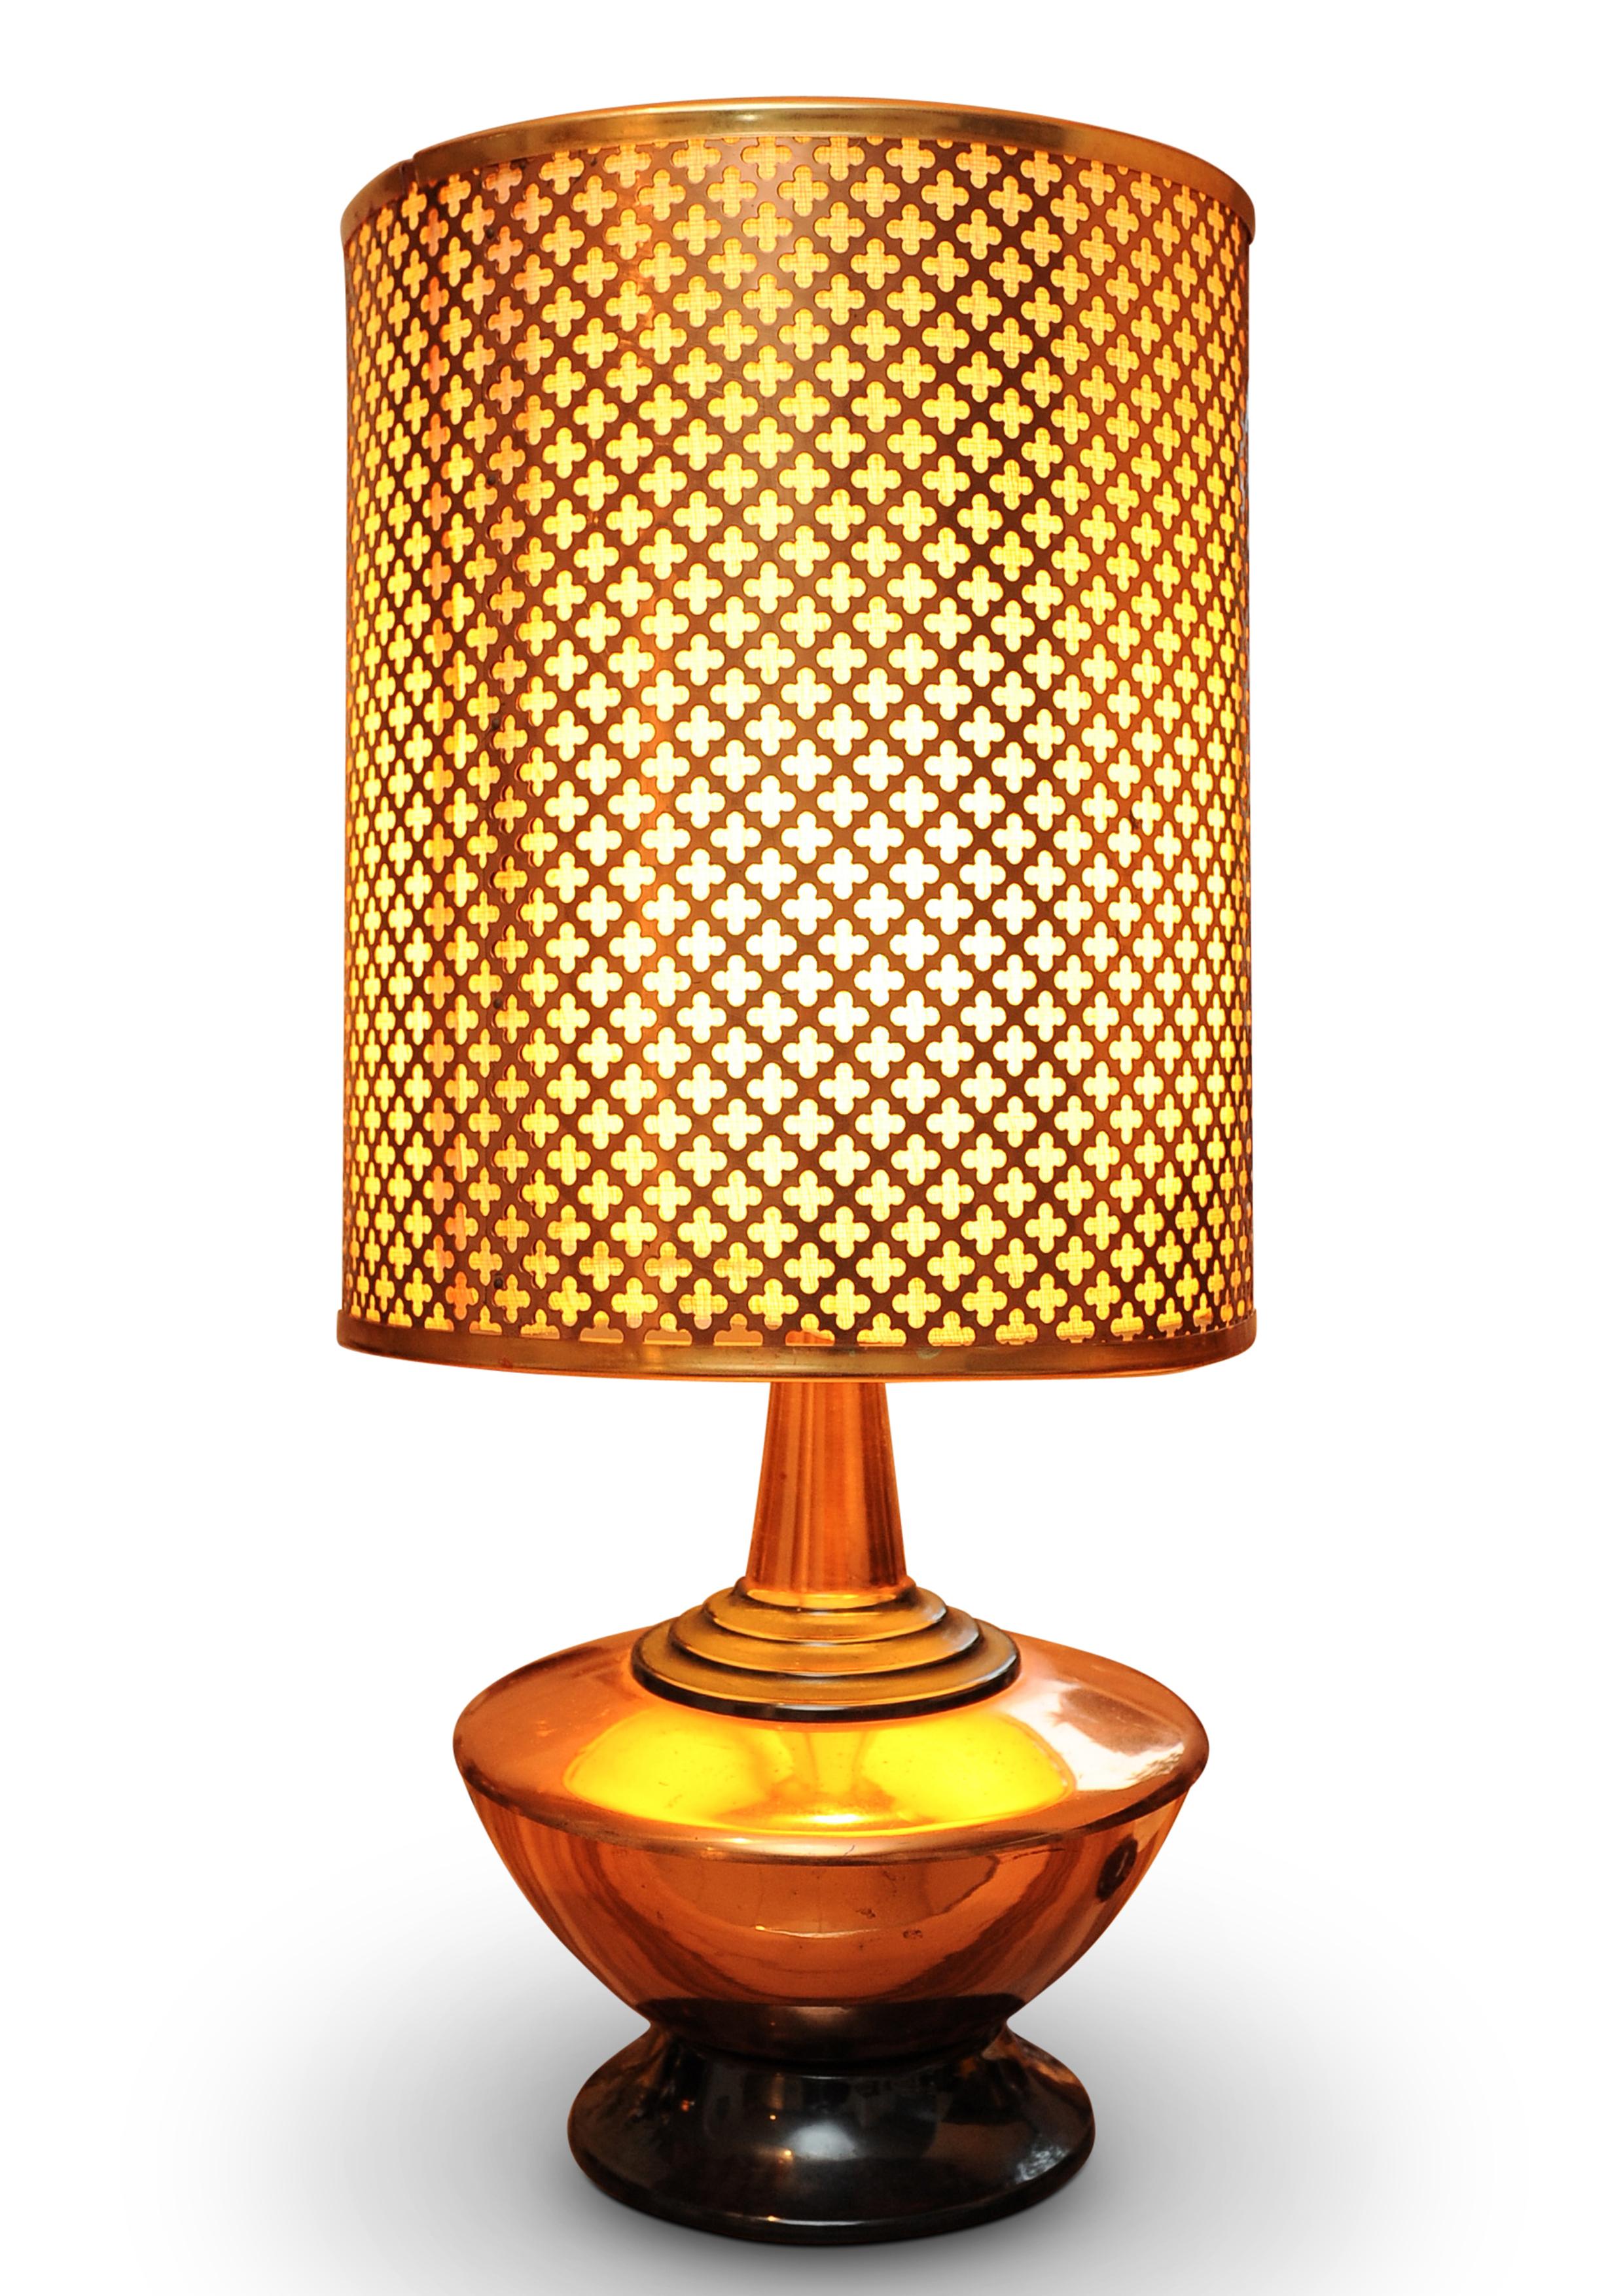 A Zambian Copper Table Lamp With A Repeating Alhambra Design Lattice Work Pattern..

Copper shade has a linen back, lamp column features on an ebonised centre.

